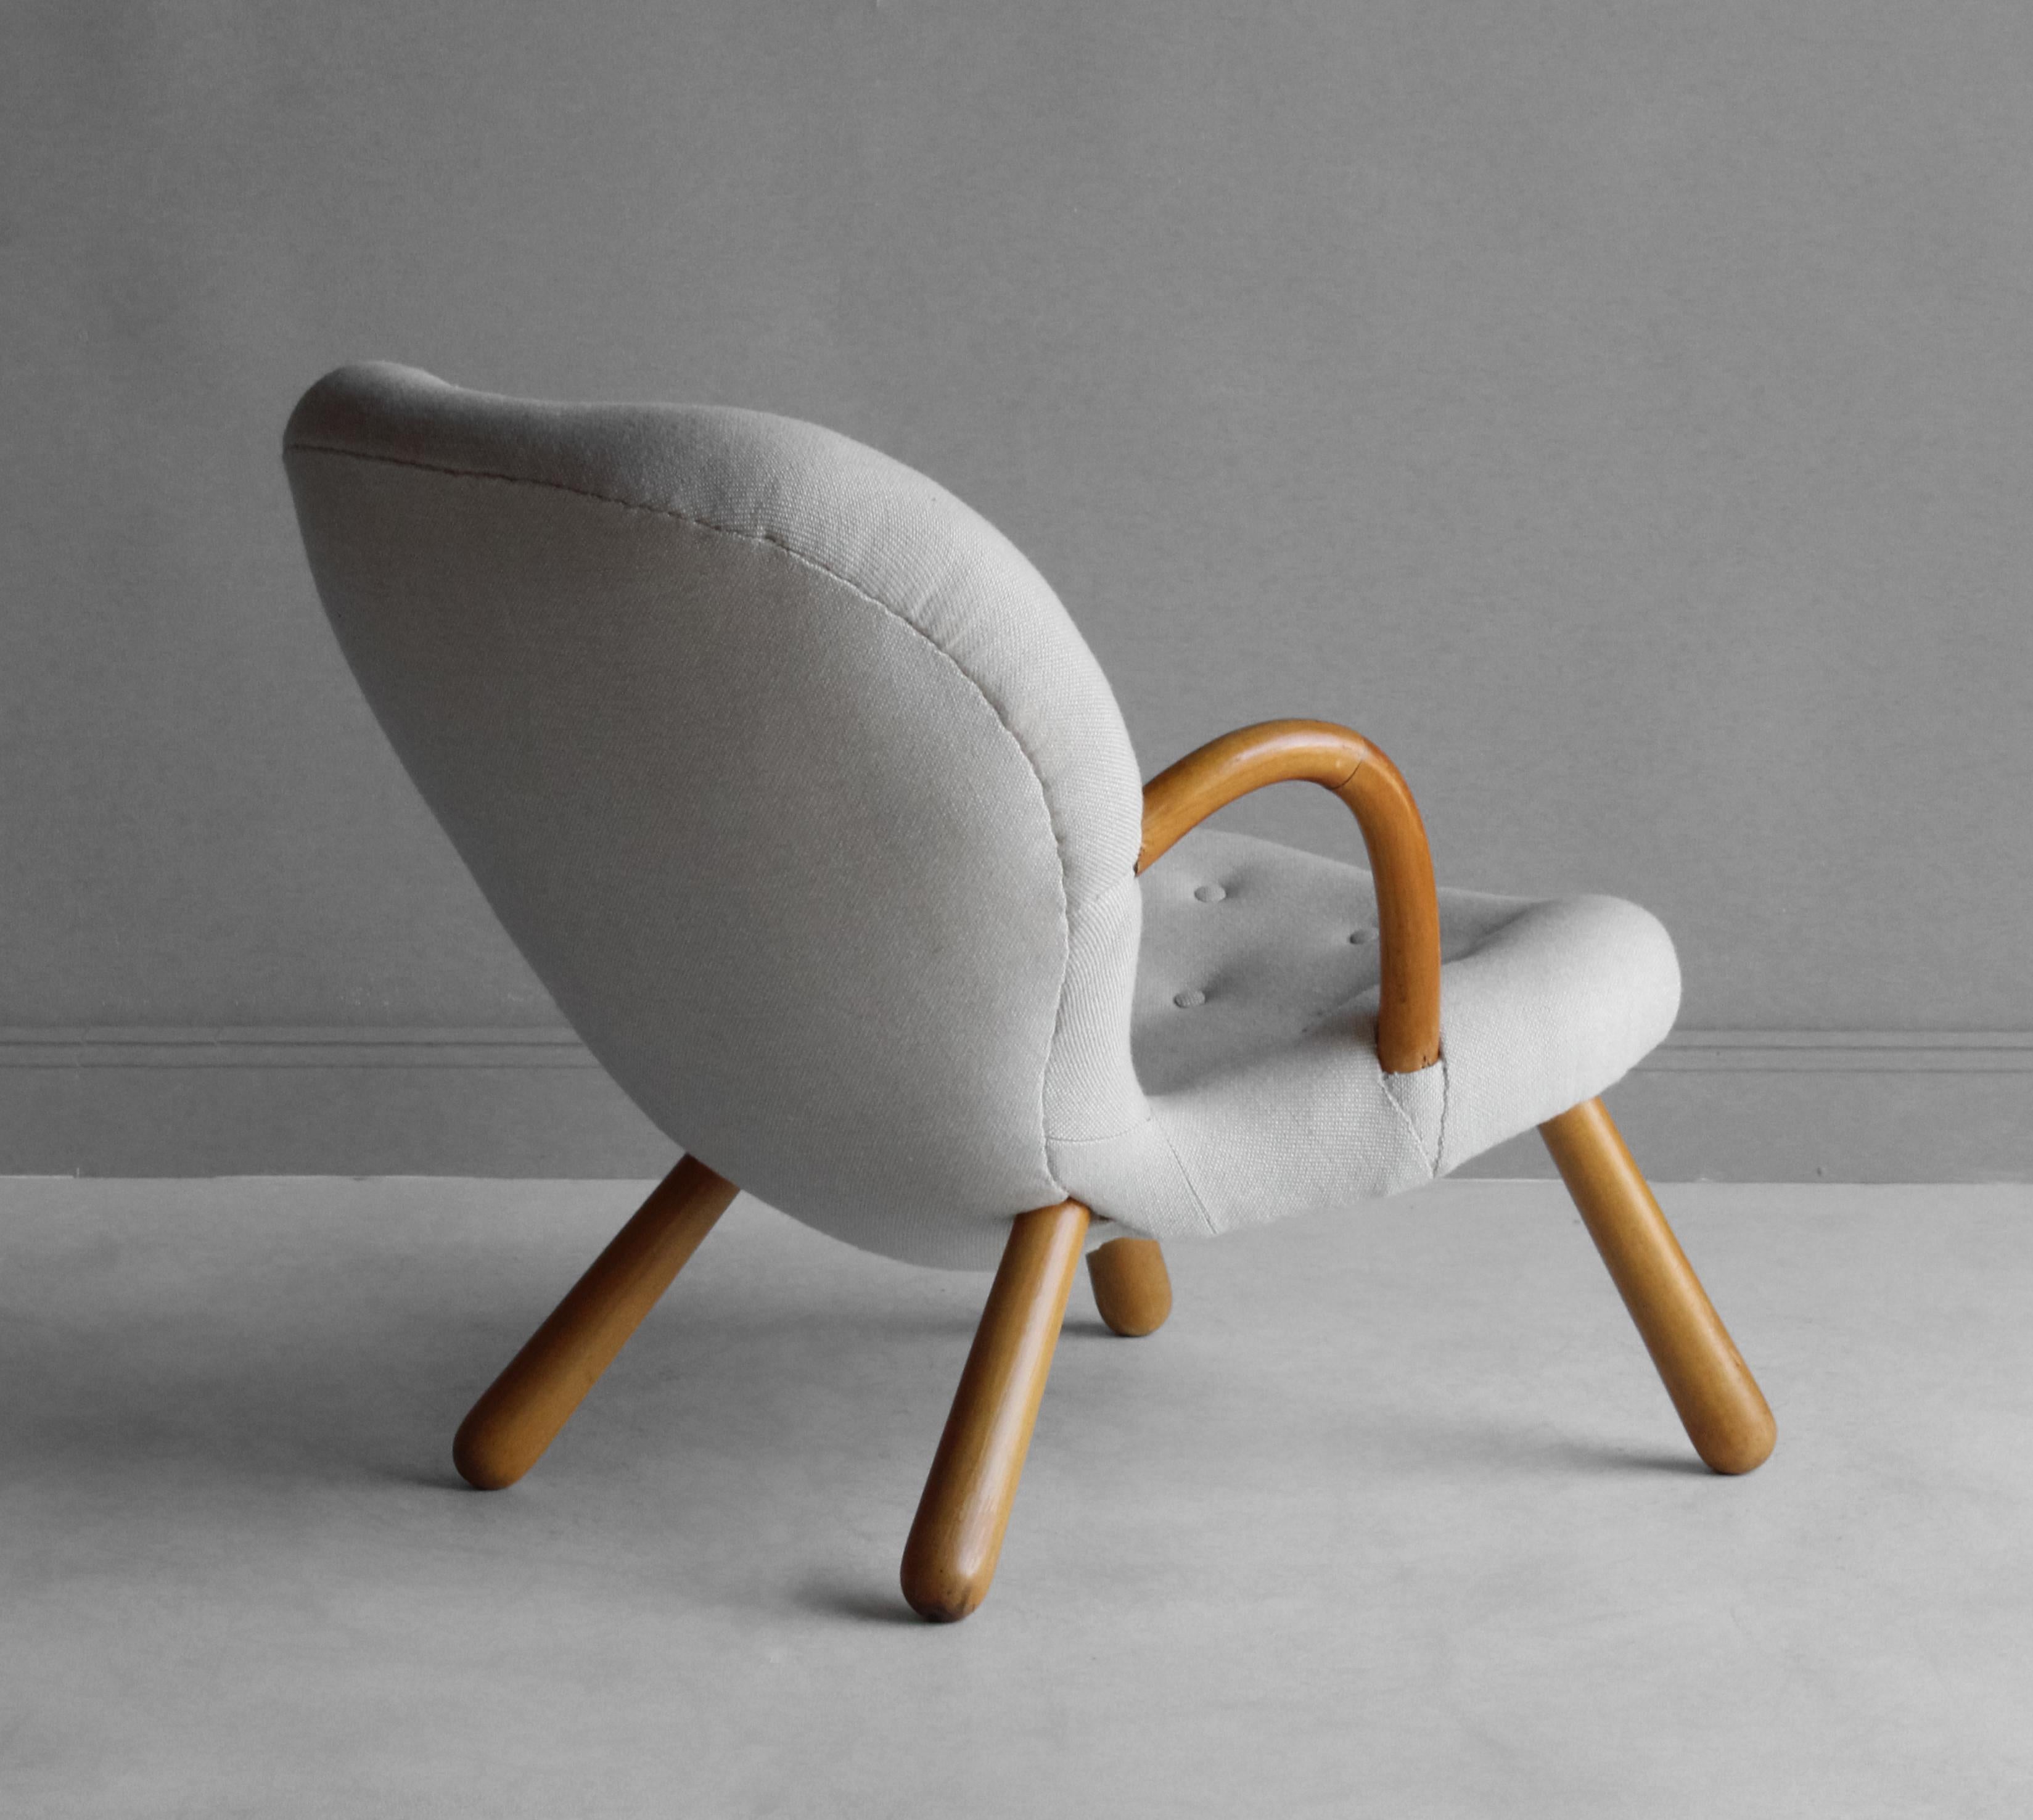 An organic Arnold Madsen lounge chair or clam chair. Stained beech frame, upholstered in traditional Scandinavian fabric.

Other 20th century designers working in the organic style include Flemming Lassen, Gio Ponti, Vladimir Kagan, Jean Royere, and